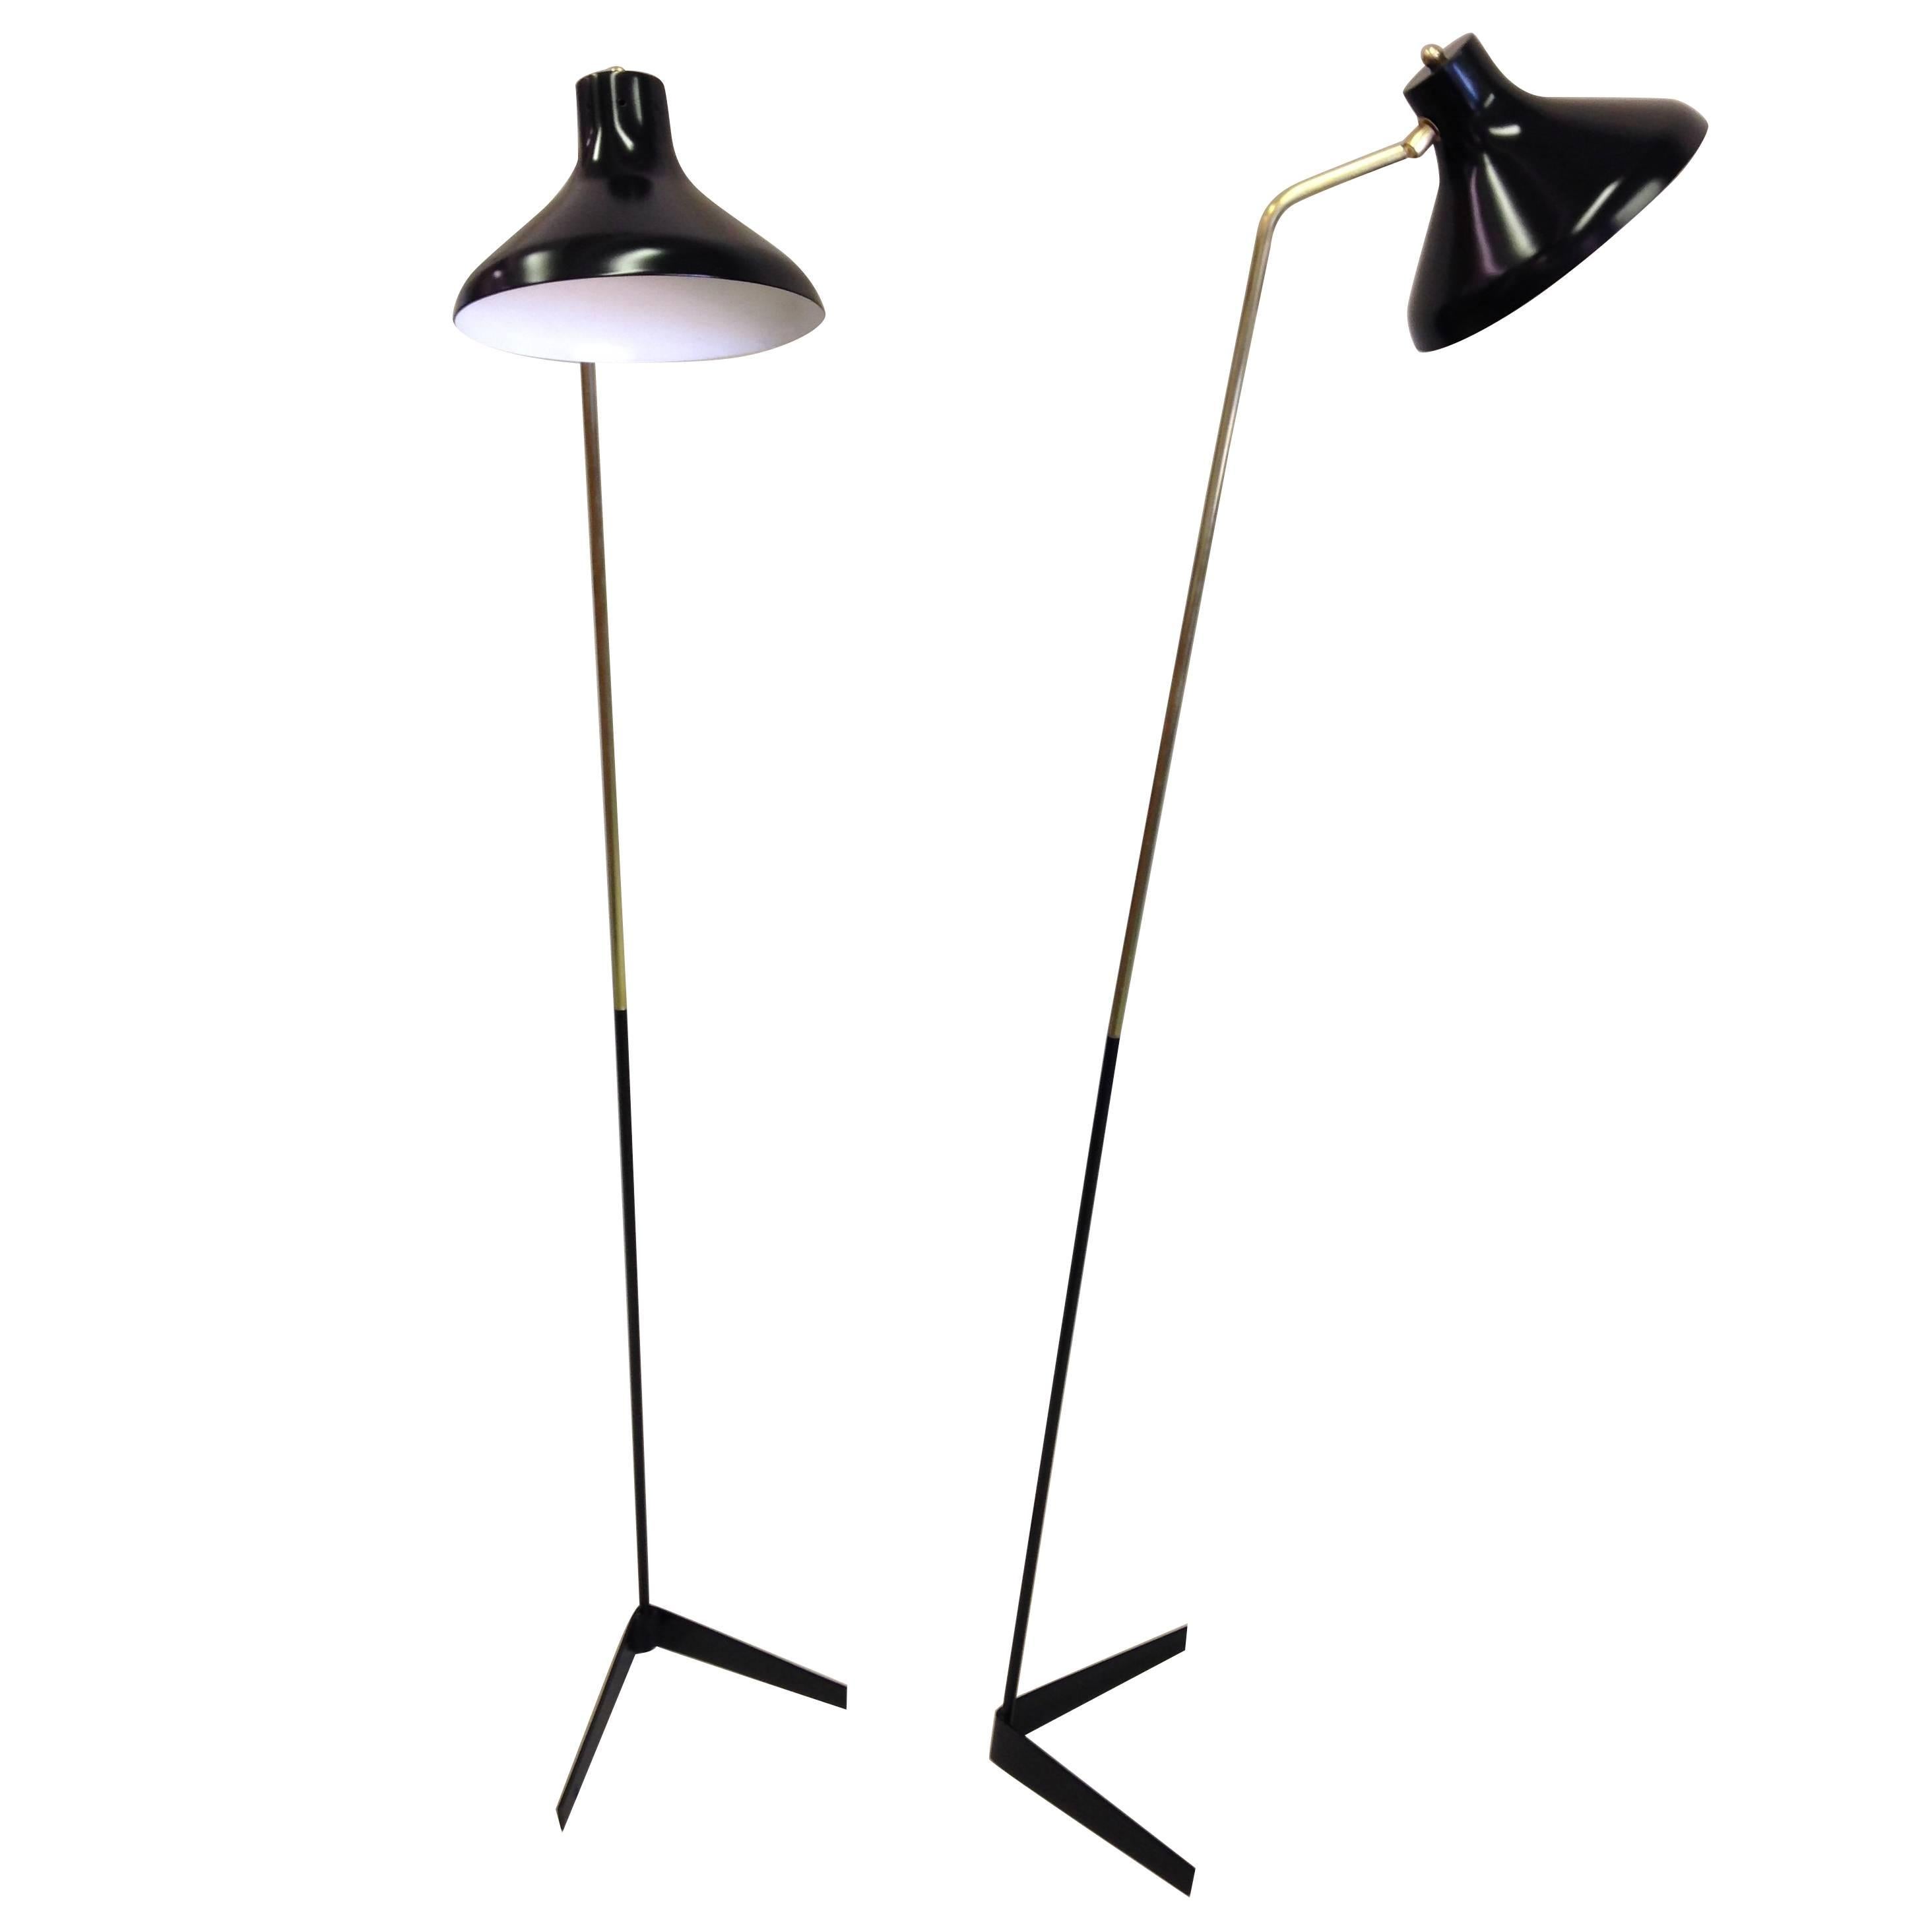 Pair of Italian Mid-Century Modern Articulated Floor Lamps by Ostuni for O-Luce